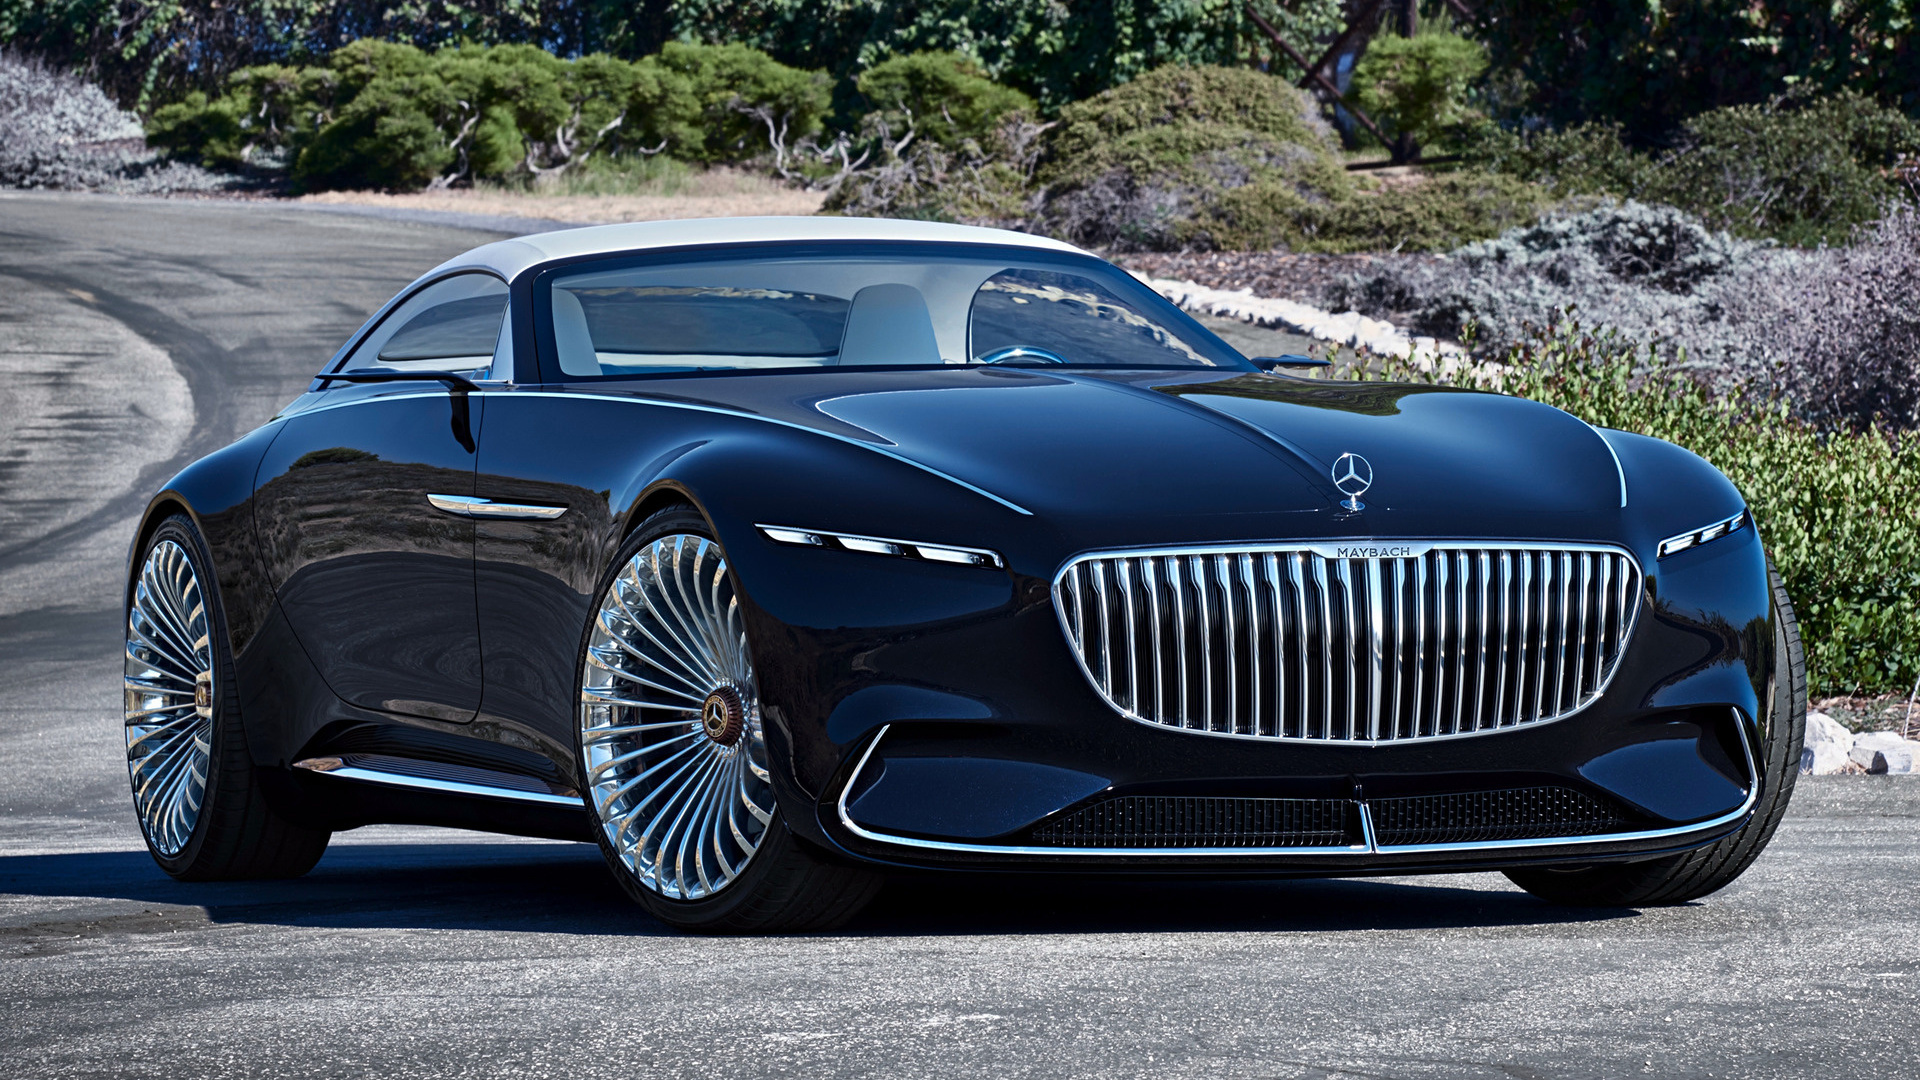 Mercedes Maybach 6 cabriolet, Visionary styling, Ultimate luxury, Open-top opulence, 1920x1080 Full HD Desktop